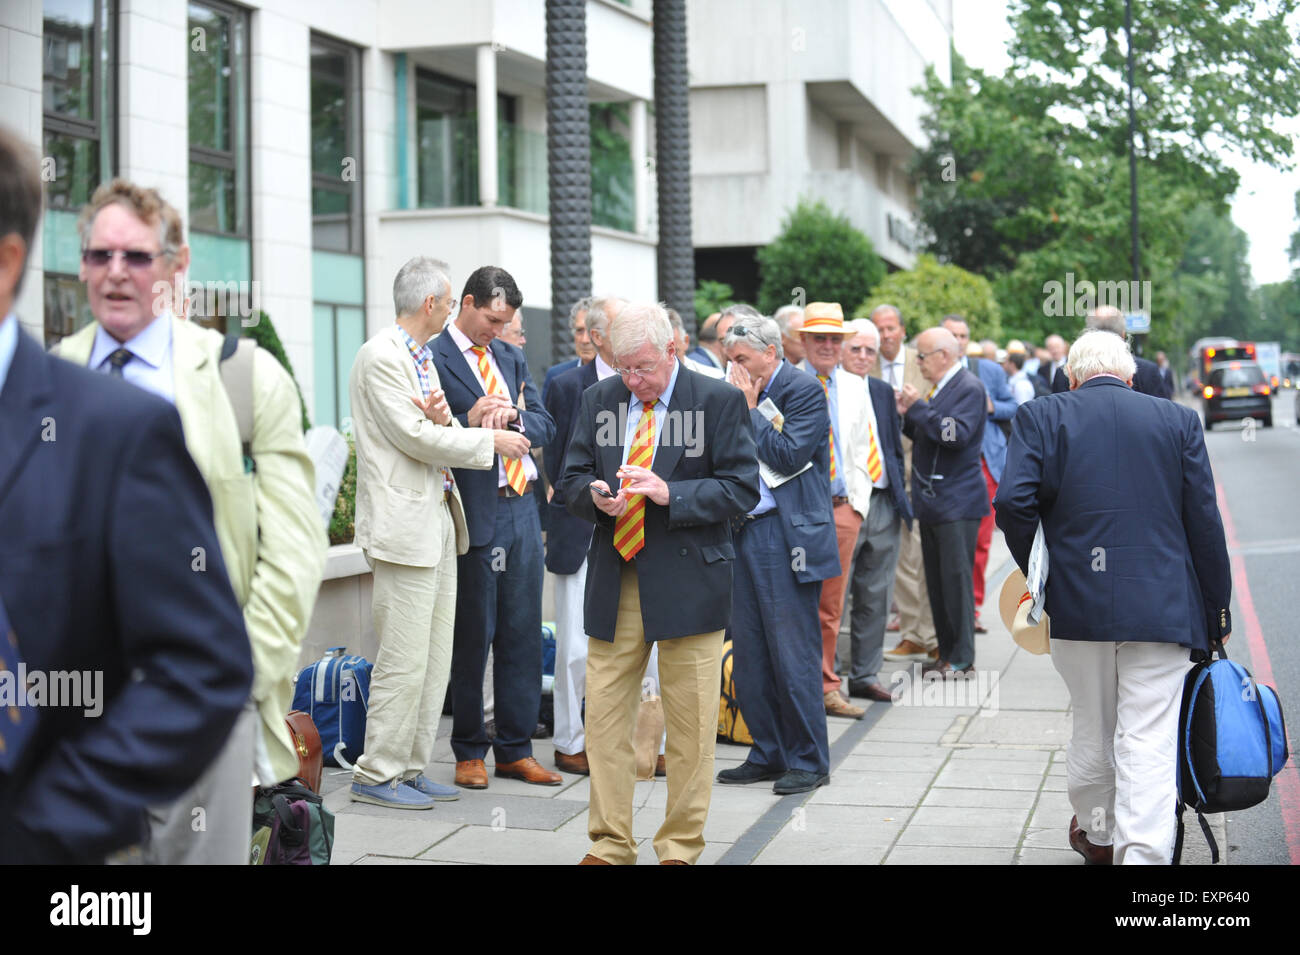 Lord's Test Cricket match queue members queuing Stock Photo